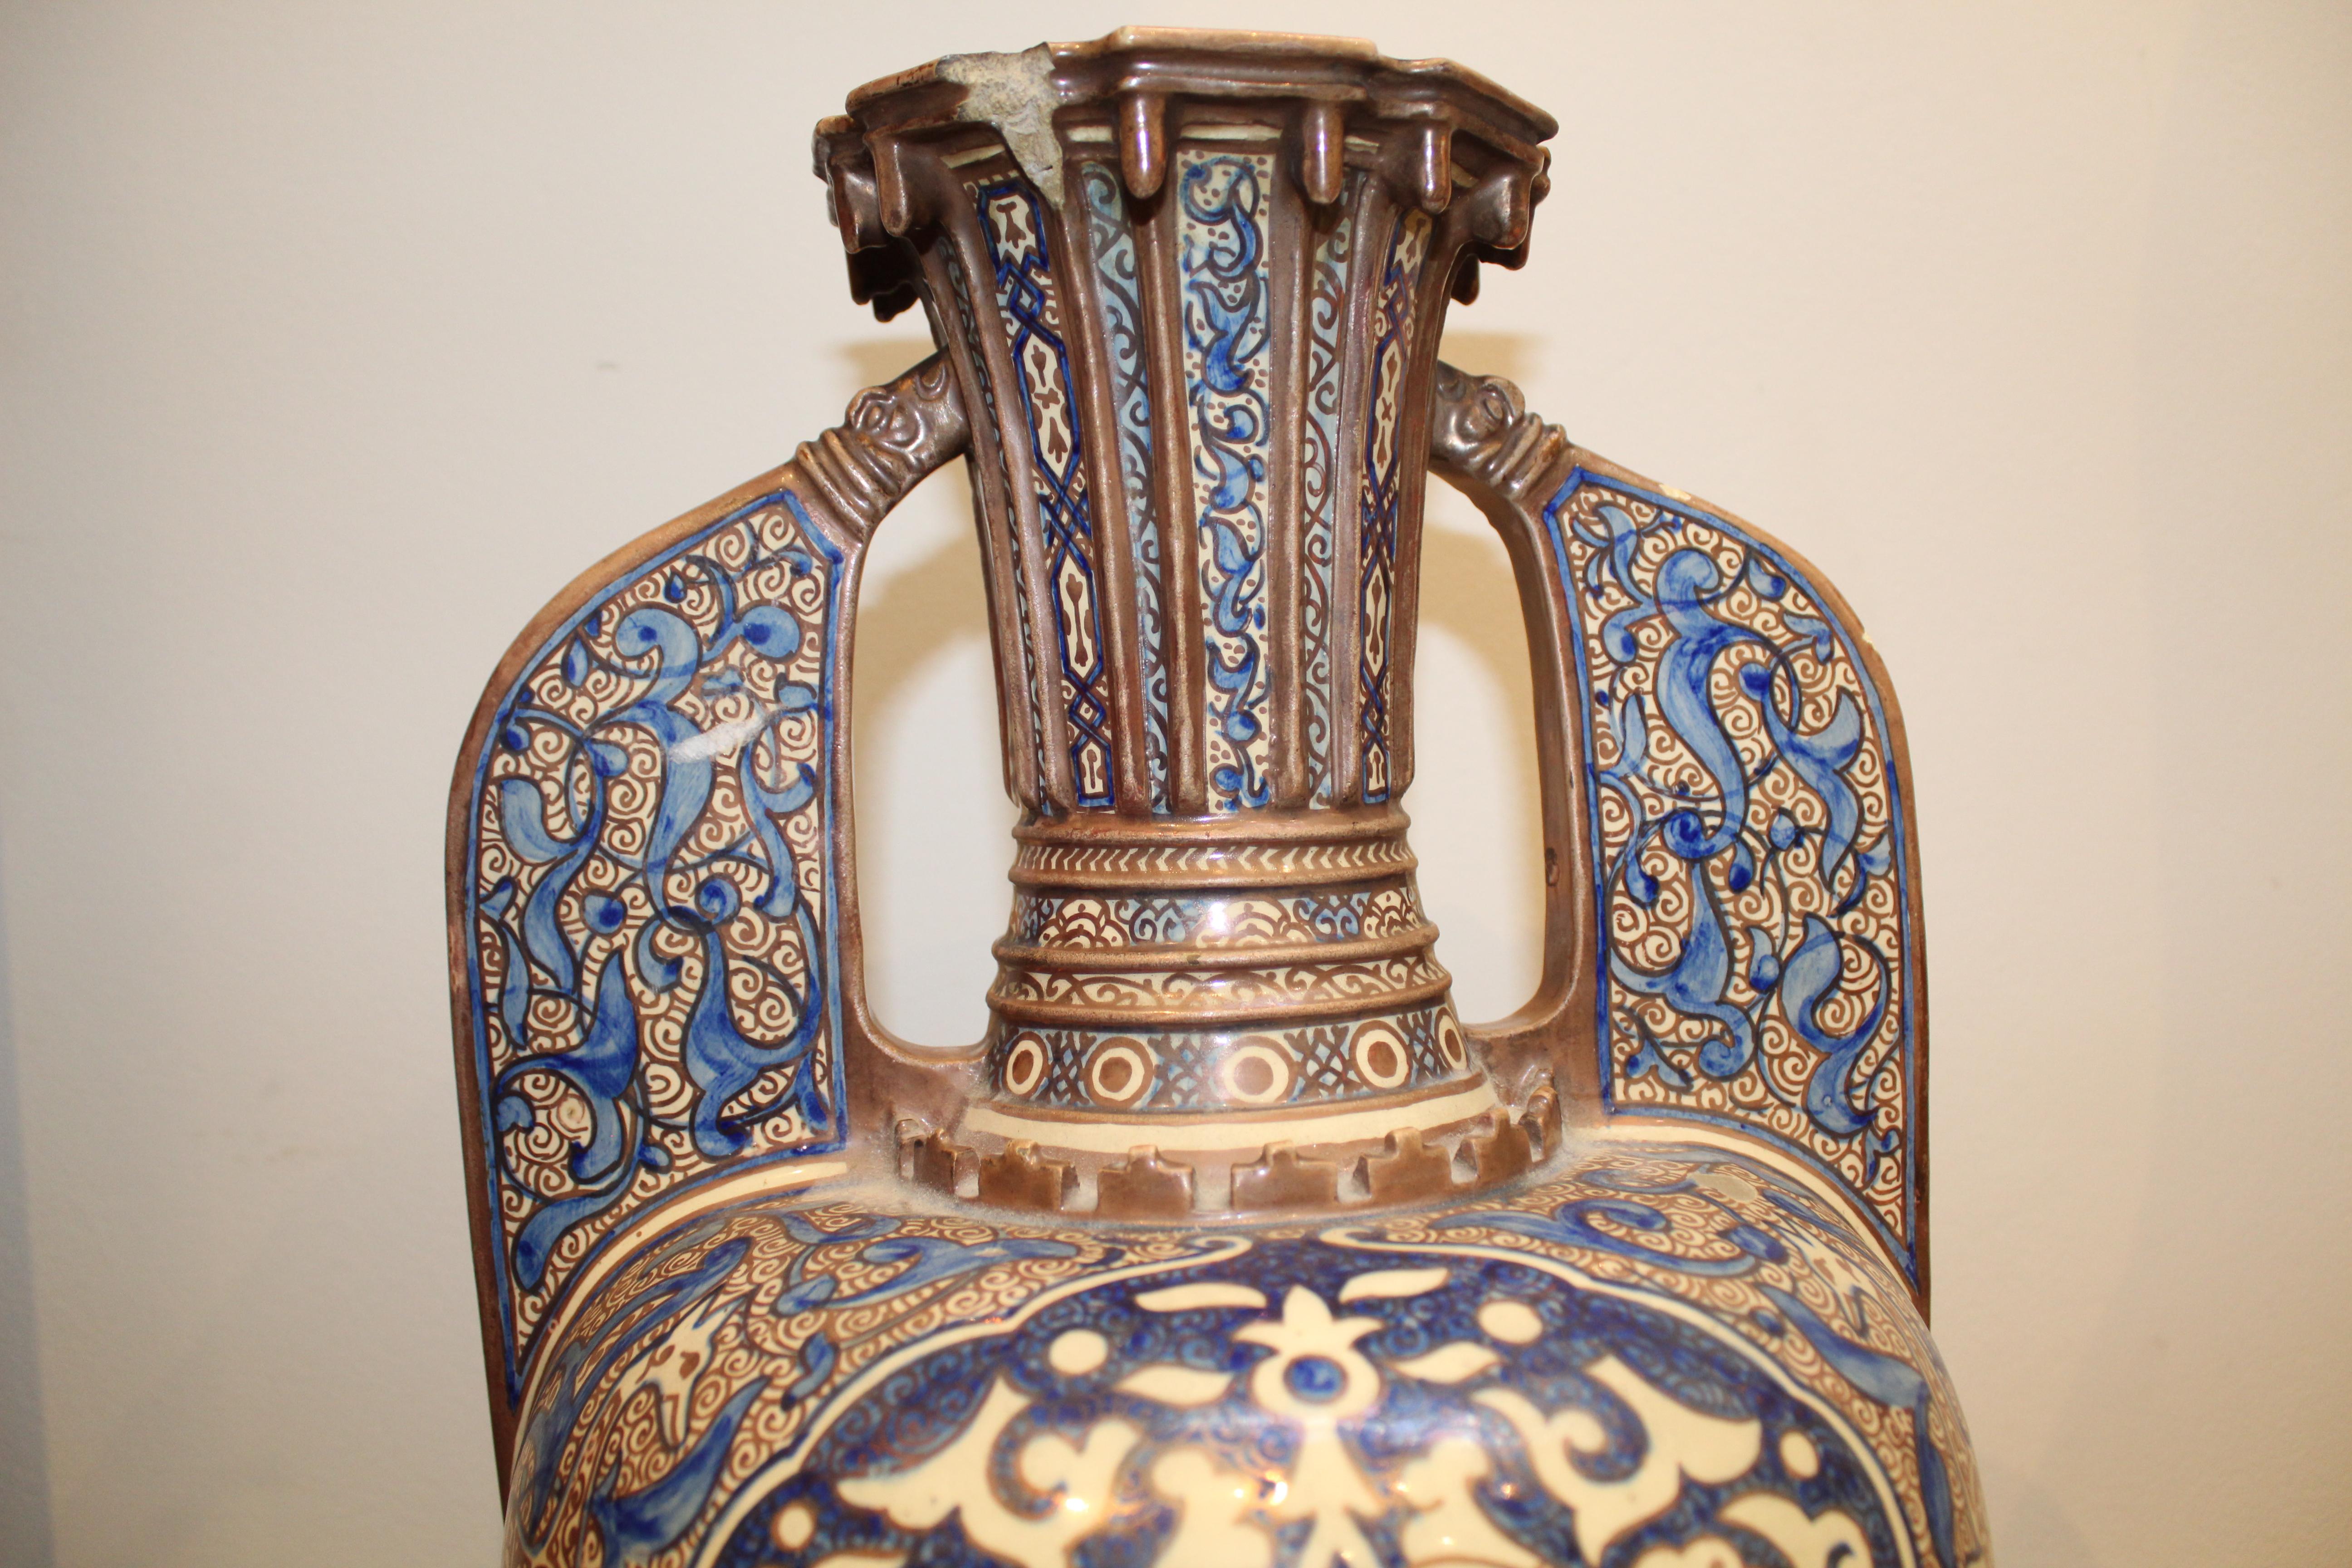 With a pear-shaped body and two 'wing' handles connected to the tall neck. It features various colours in decoration, such as blue, gold, and white. Made in Spain for the Islamic market.

Measures: With stand: height 63cm 
Width: 30cm.